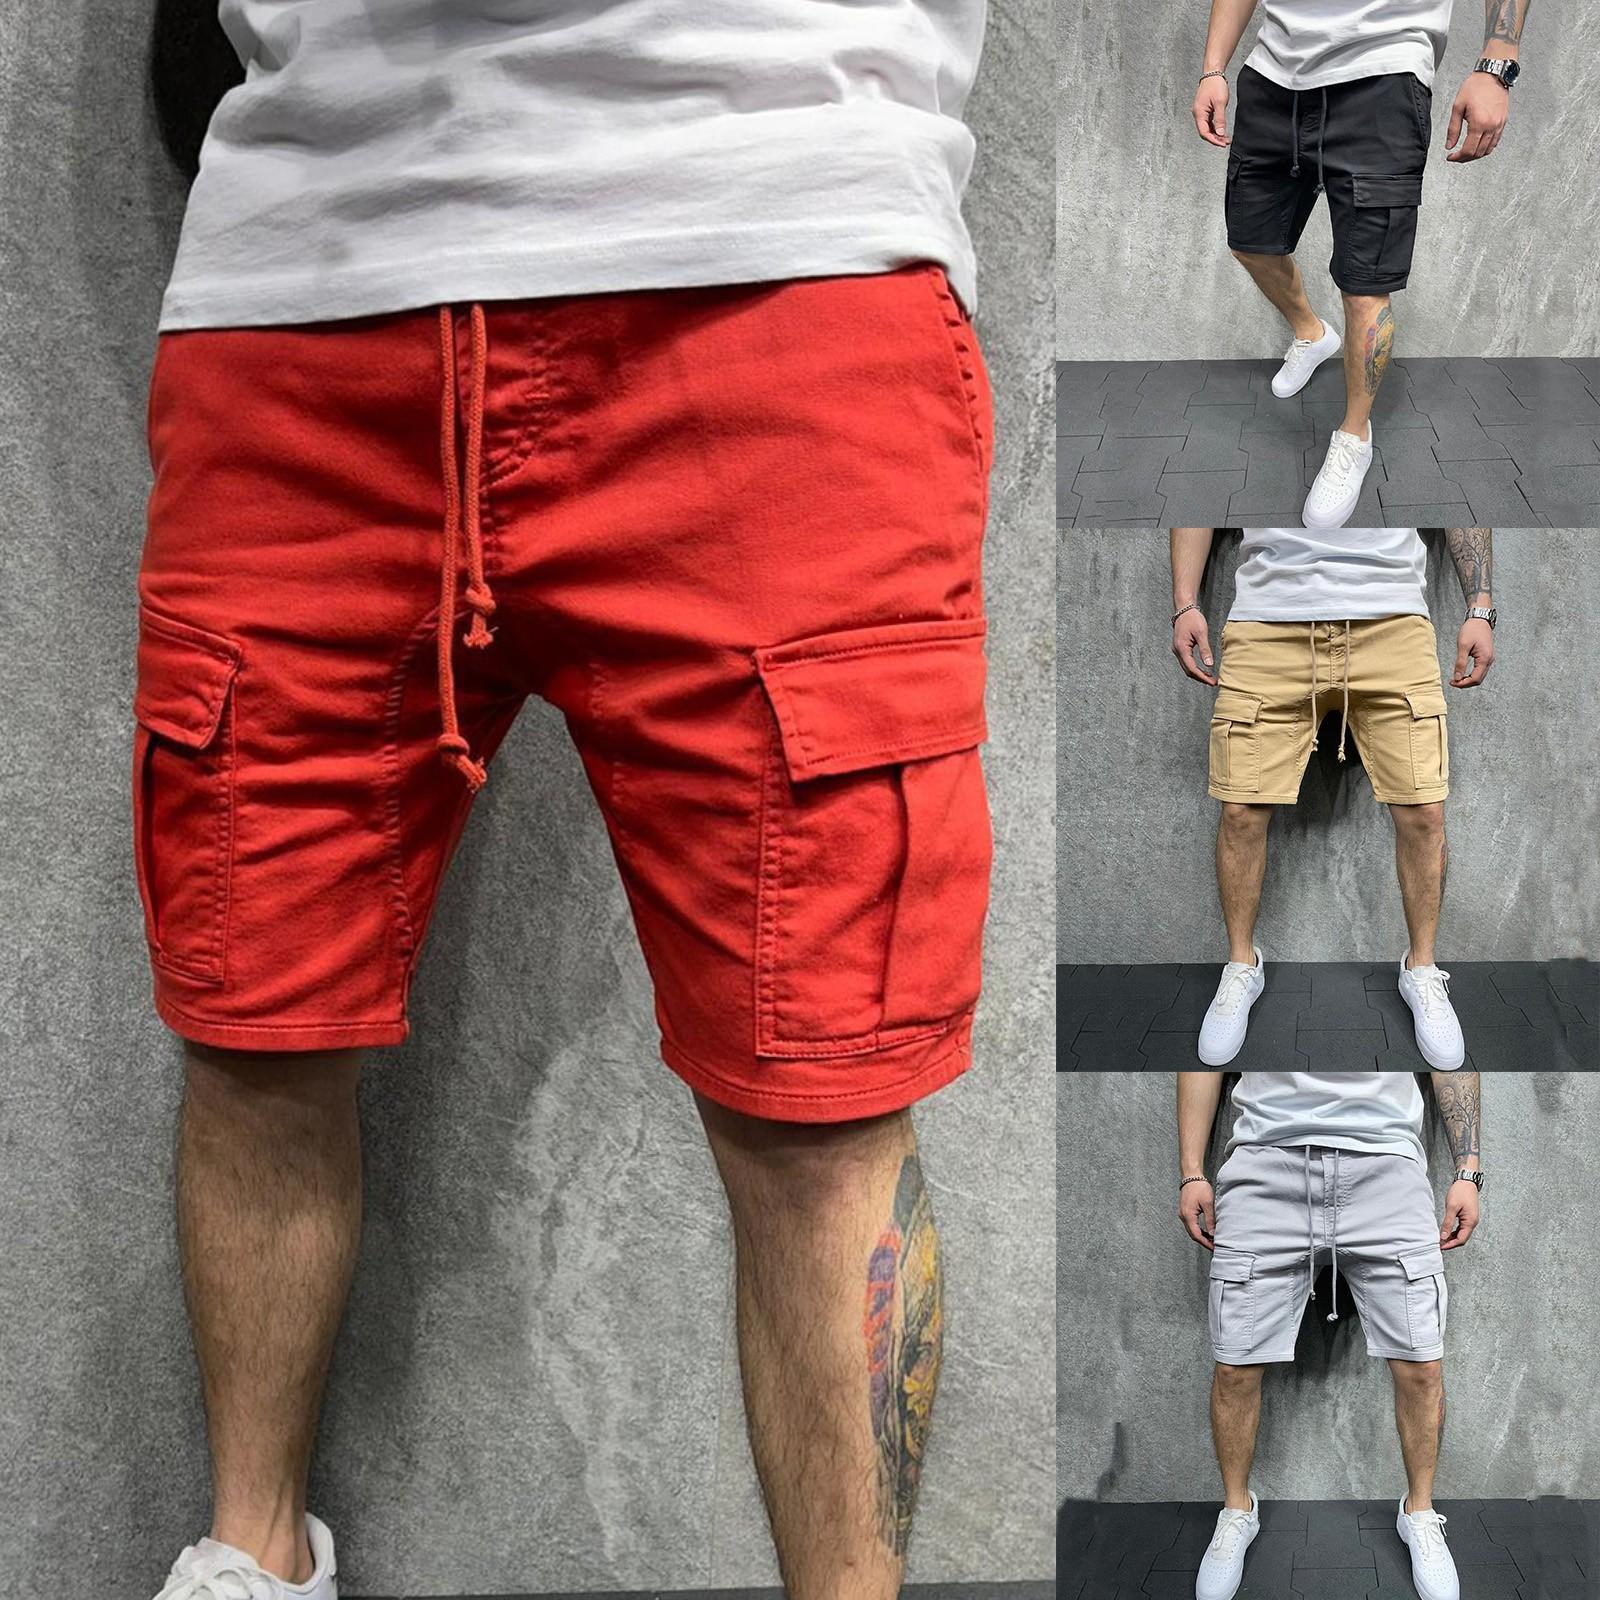 Great home Men's Fashion Summer Multi-pocket Work Shorts Loose Outdoor Casual Shorts